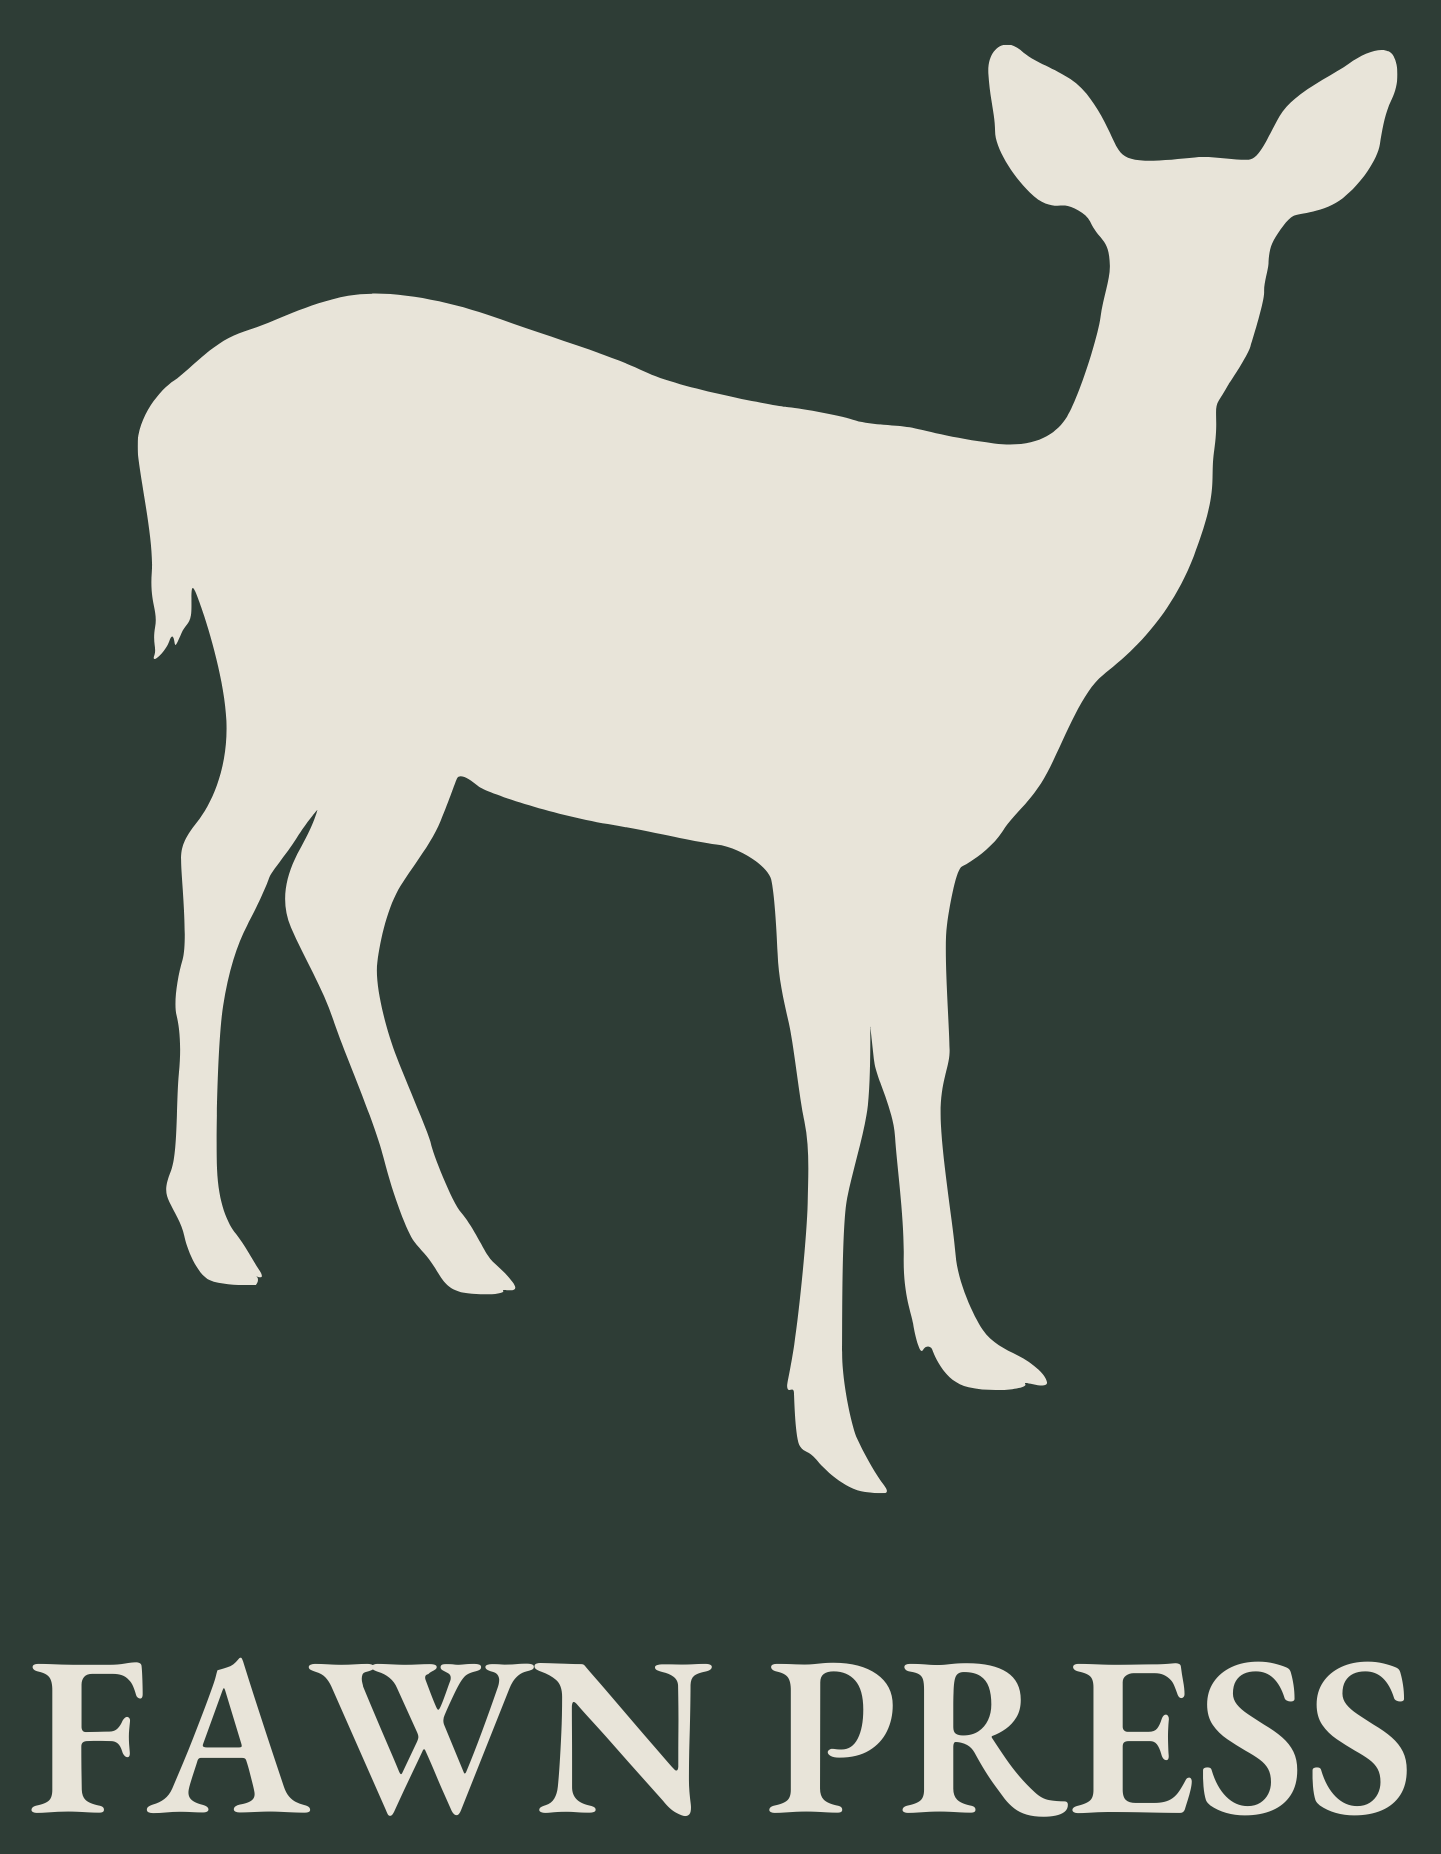 fawn press logo is the cream silhouette of a fawn against a dark green background